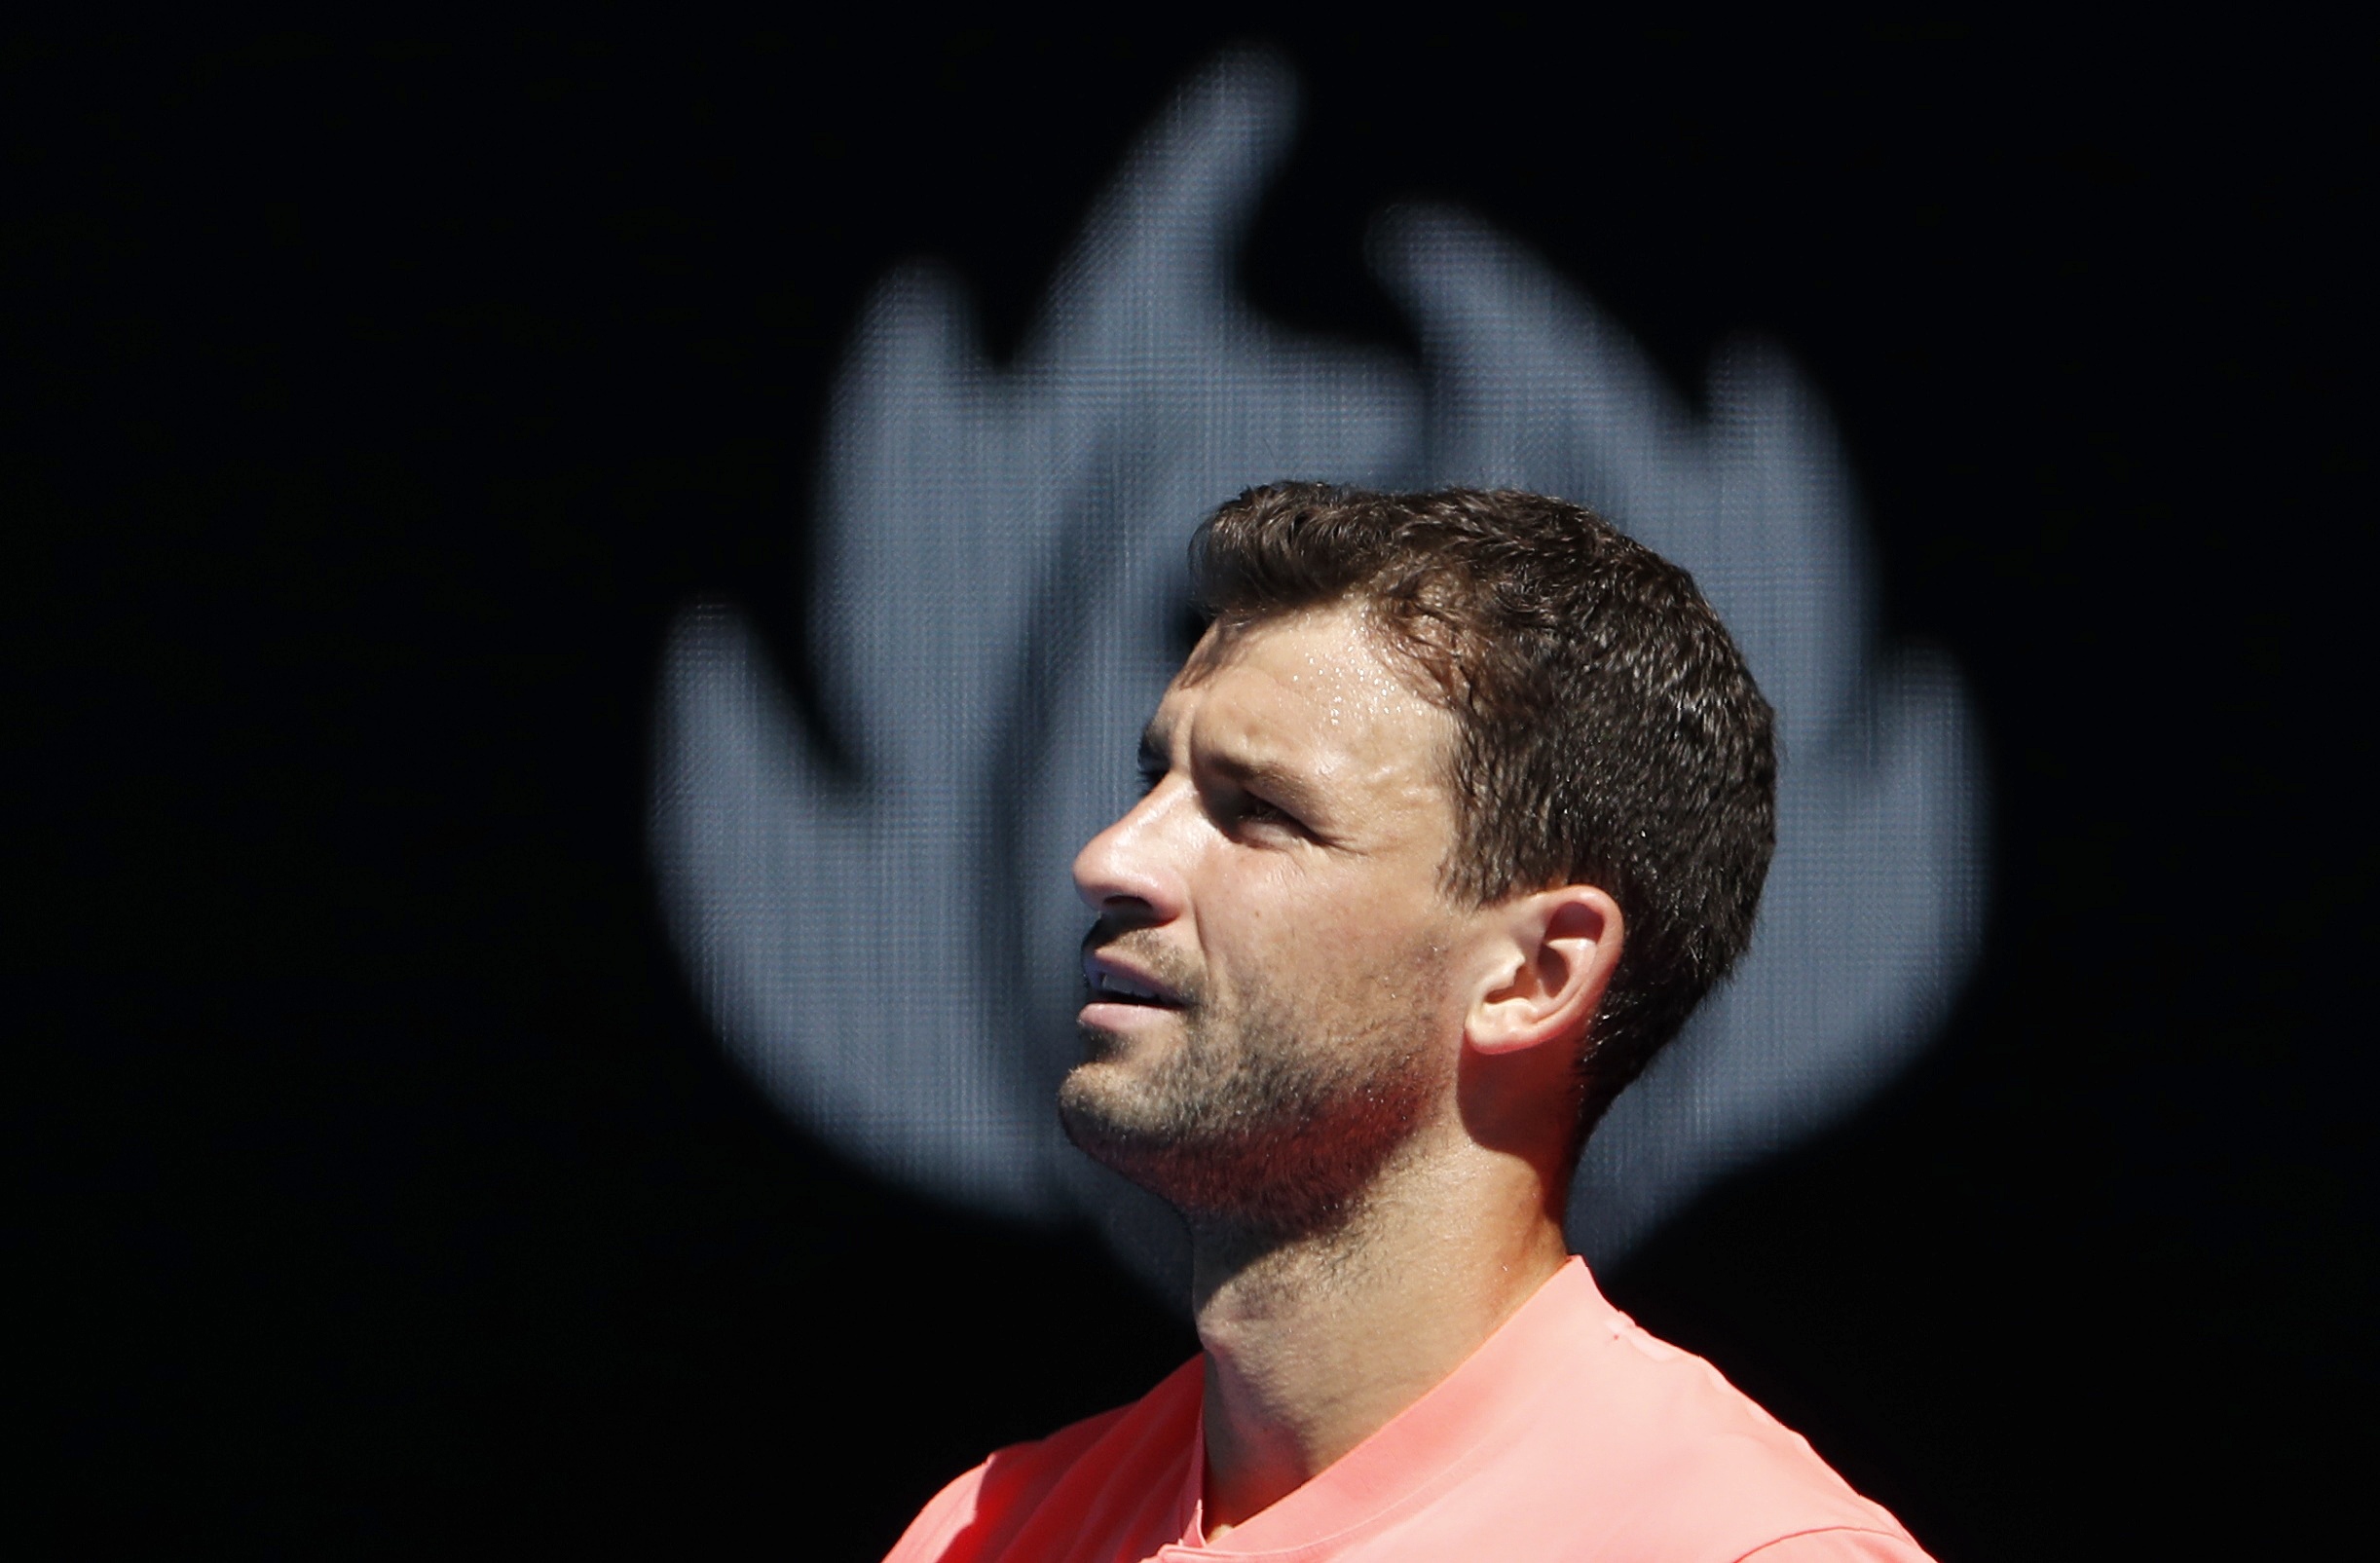 Tennis: Exhausted Dimitrov could miss Sofia Open